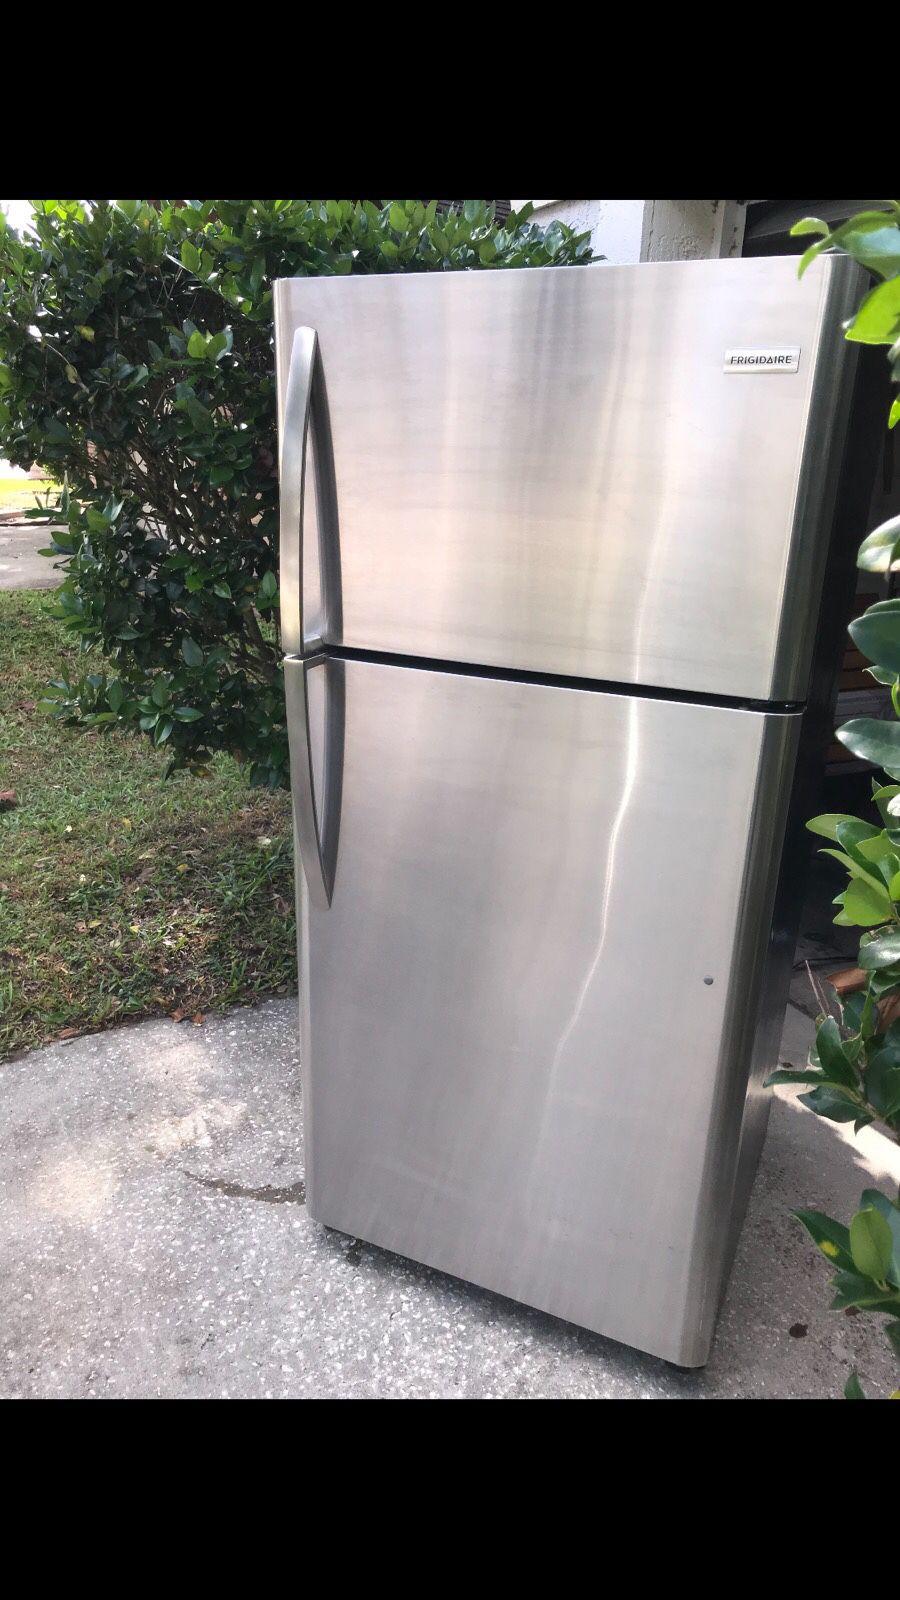 This is a Frigidaire top freezer refrigerator stainless steel and black model number FFTR1821Ts4 super clean works great looks great ice cold top and